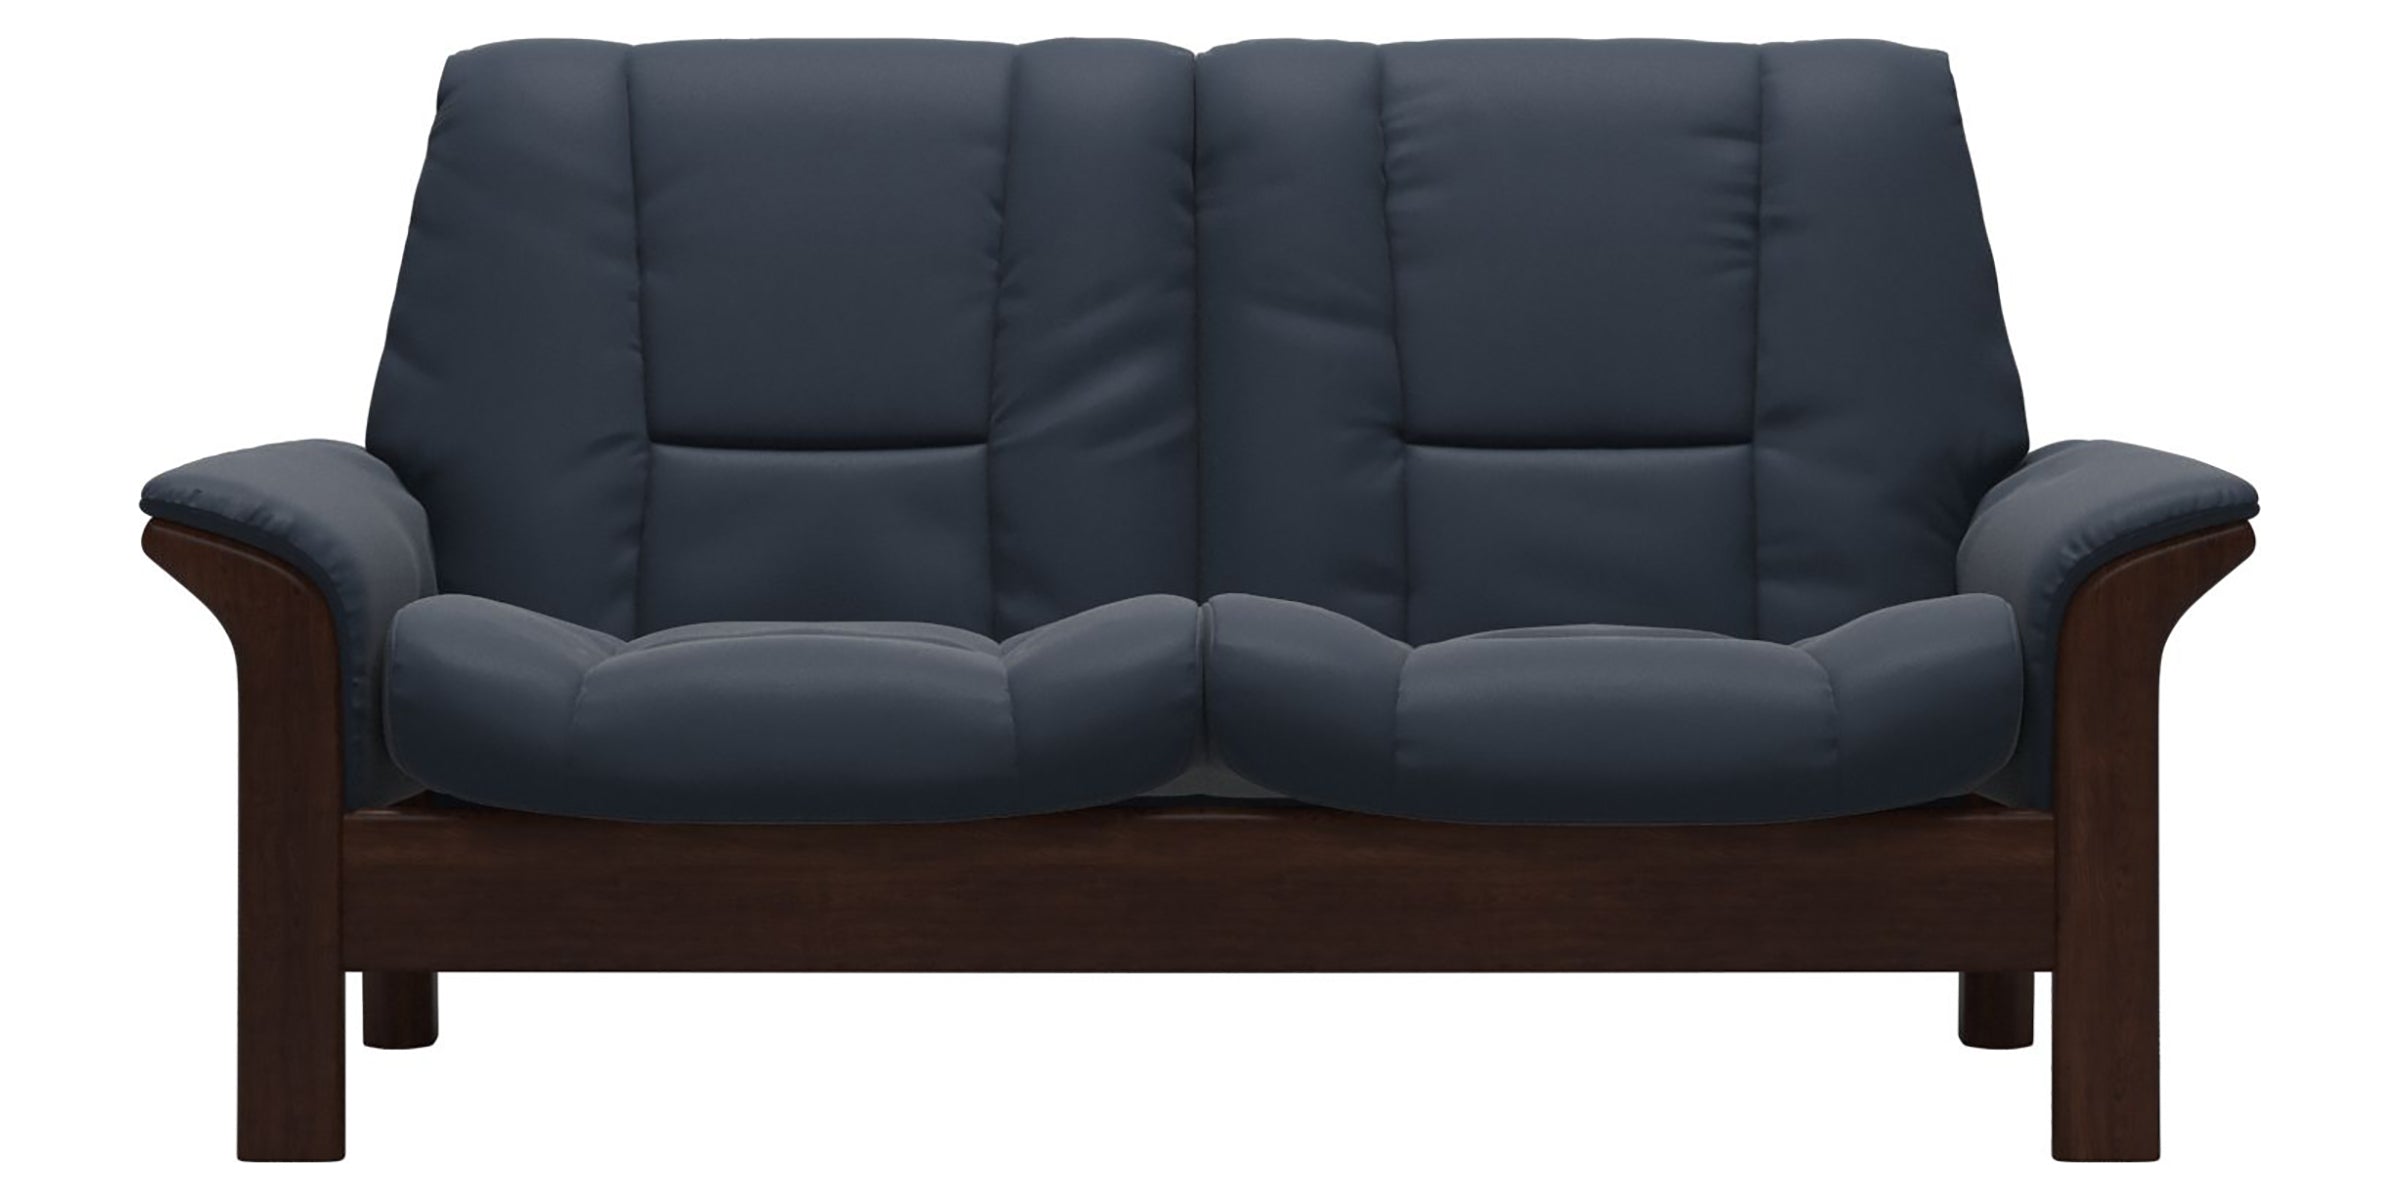 Paloma Leather Oxford Blue and Brown Base | Stressless Buckingham 2-Seater Low Back Sofa | Valley Ridge Furniture